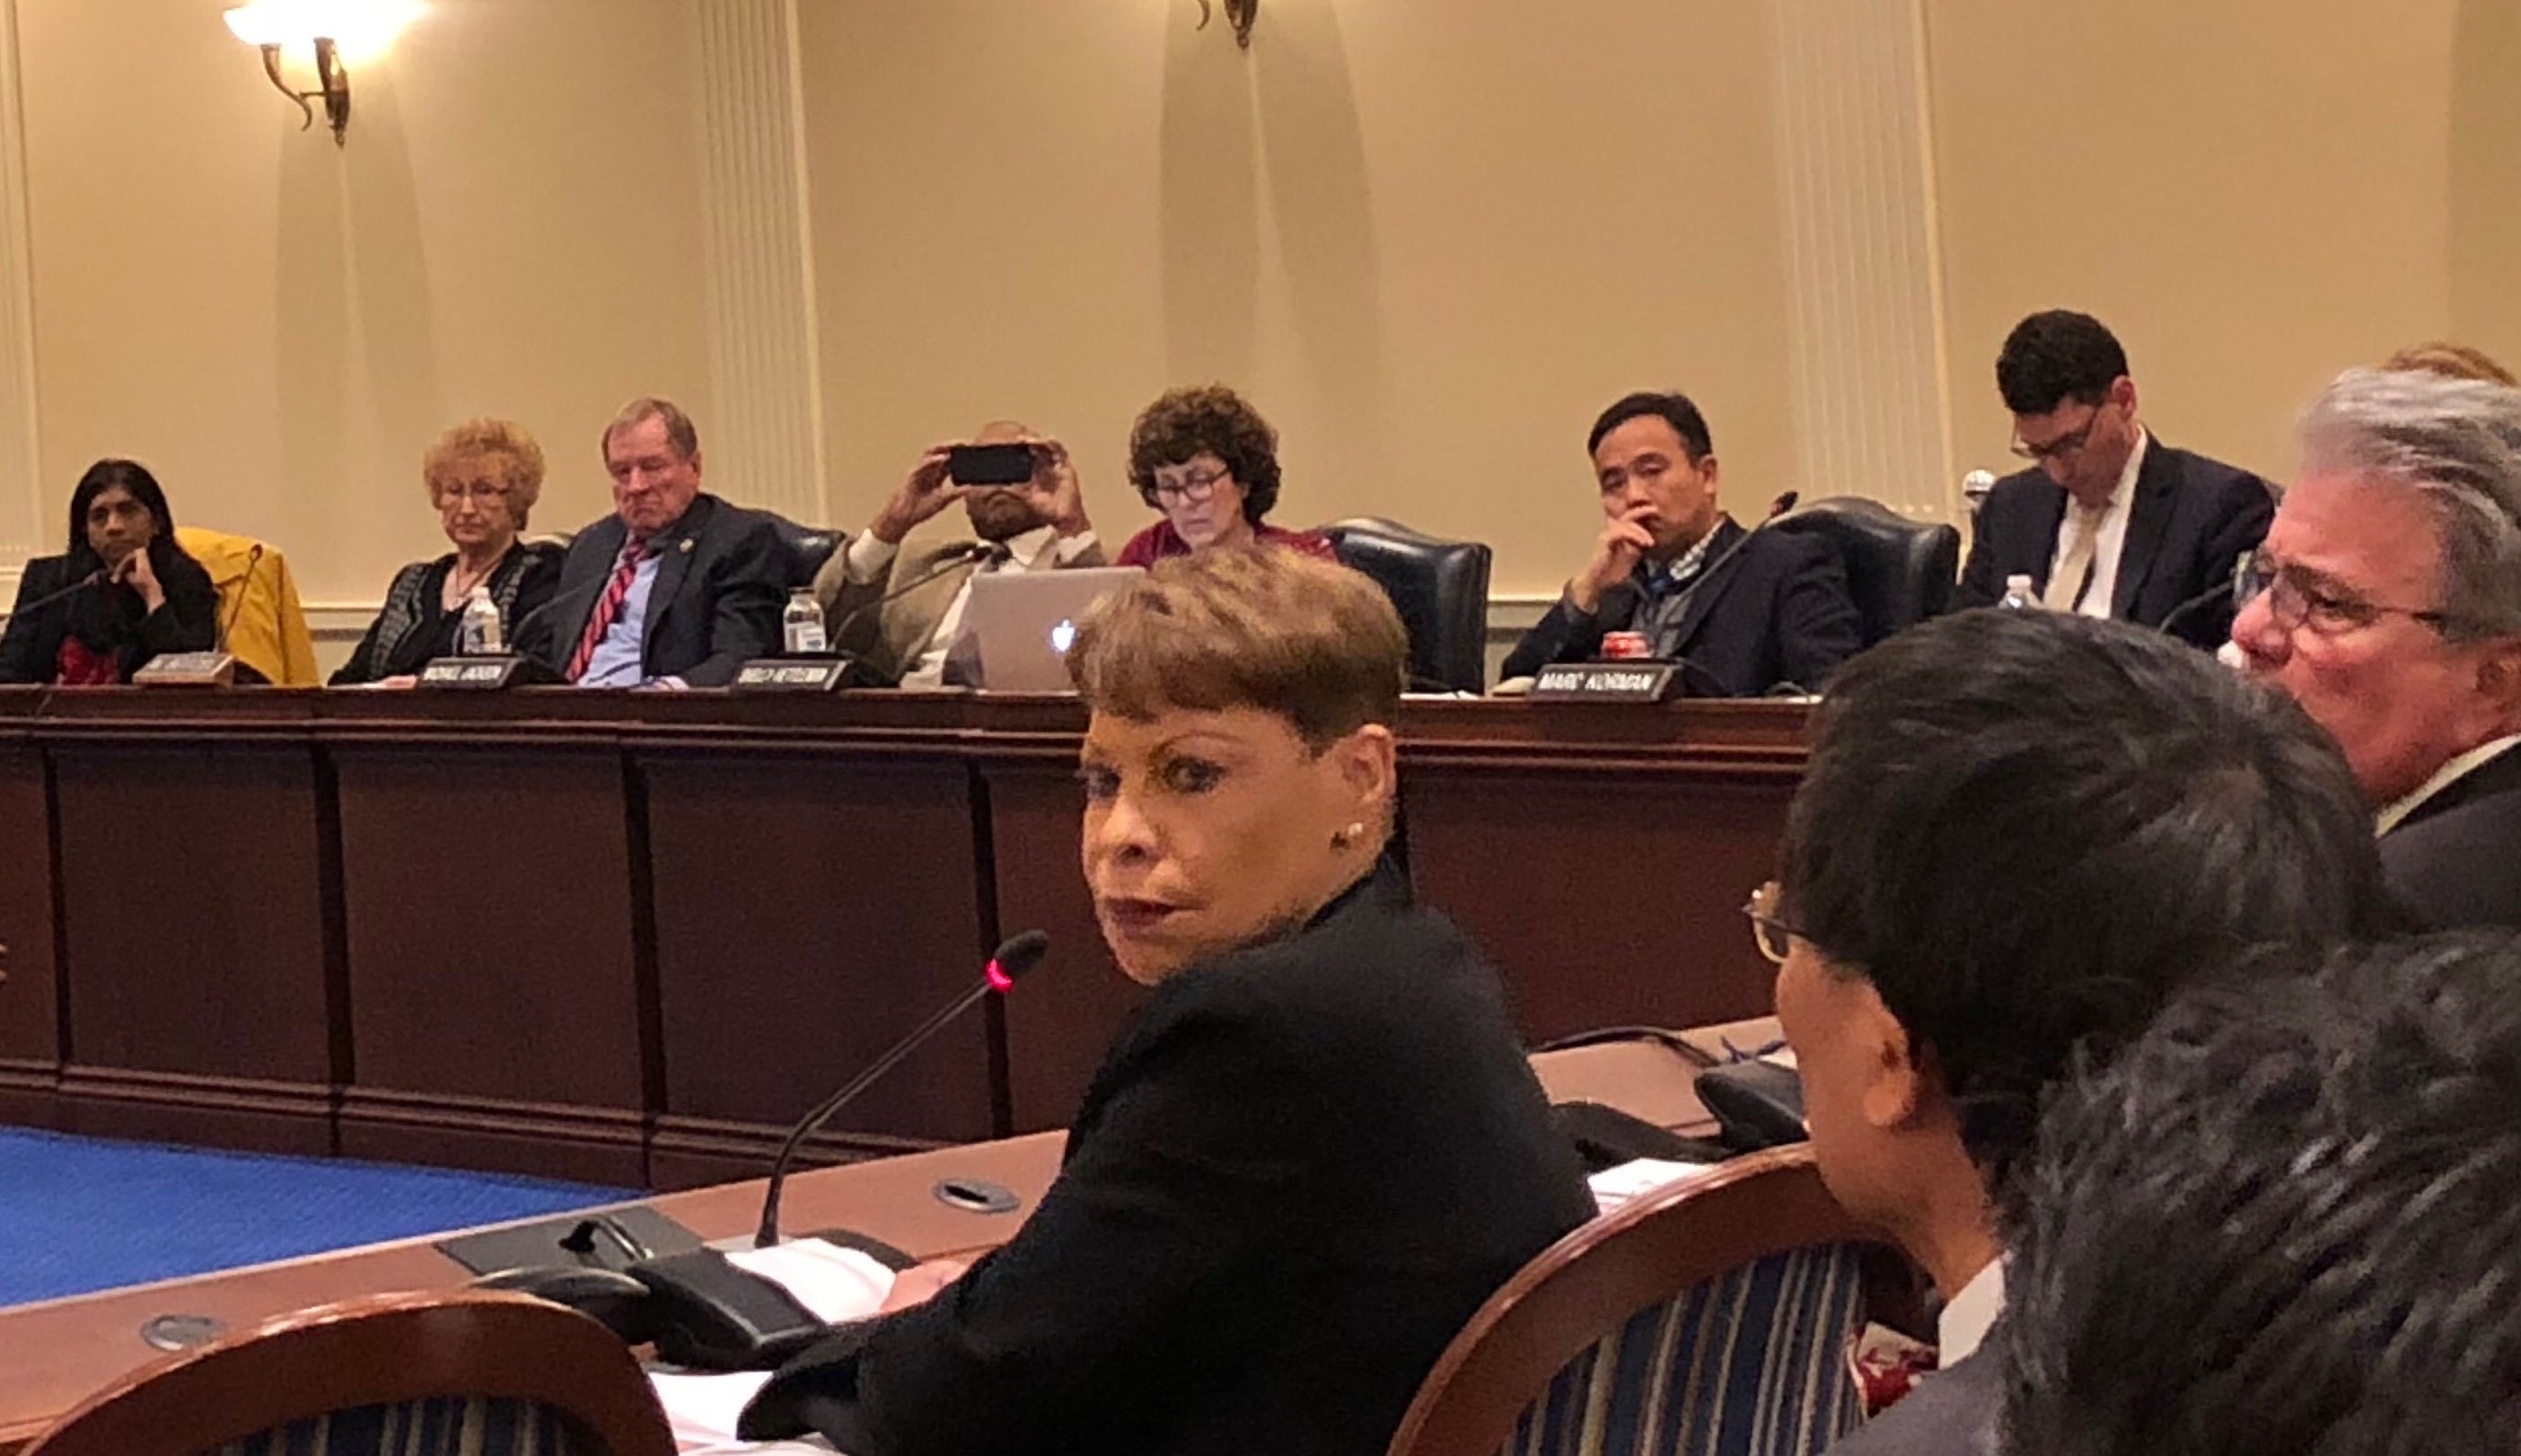 University System of Maryland Board of Regents Chairwoman Linda Gooden, Chancellor Bob Caret and University of Maryland President Wallace Loh answered questions at a Maryland House of Delegates Appropriations Committee on Thursday, Nov. 15, 2018 in Annapolis, Maryland. (Brooks DuBose/Capital News Service)